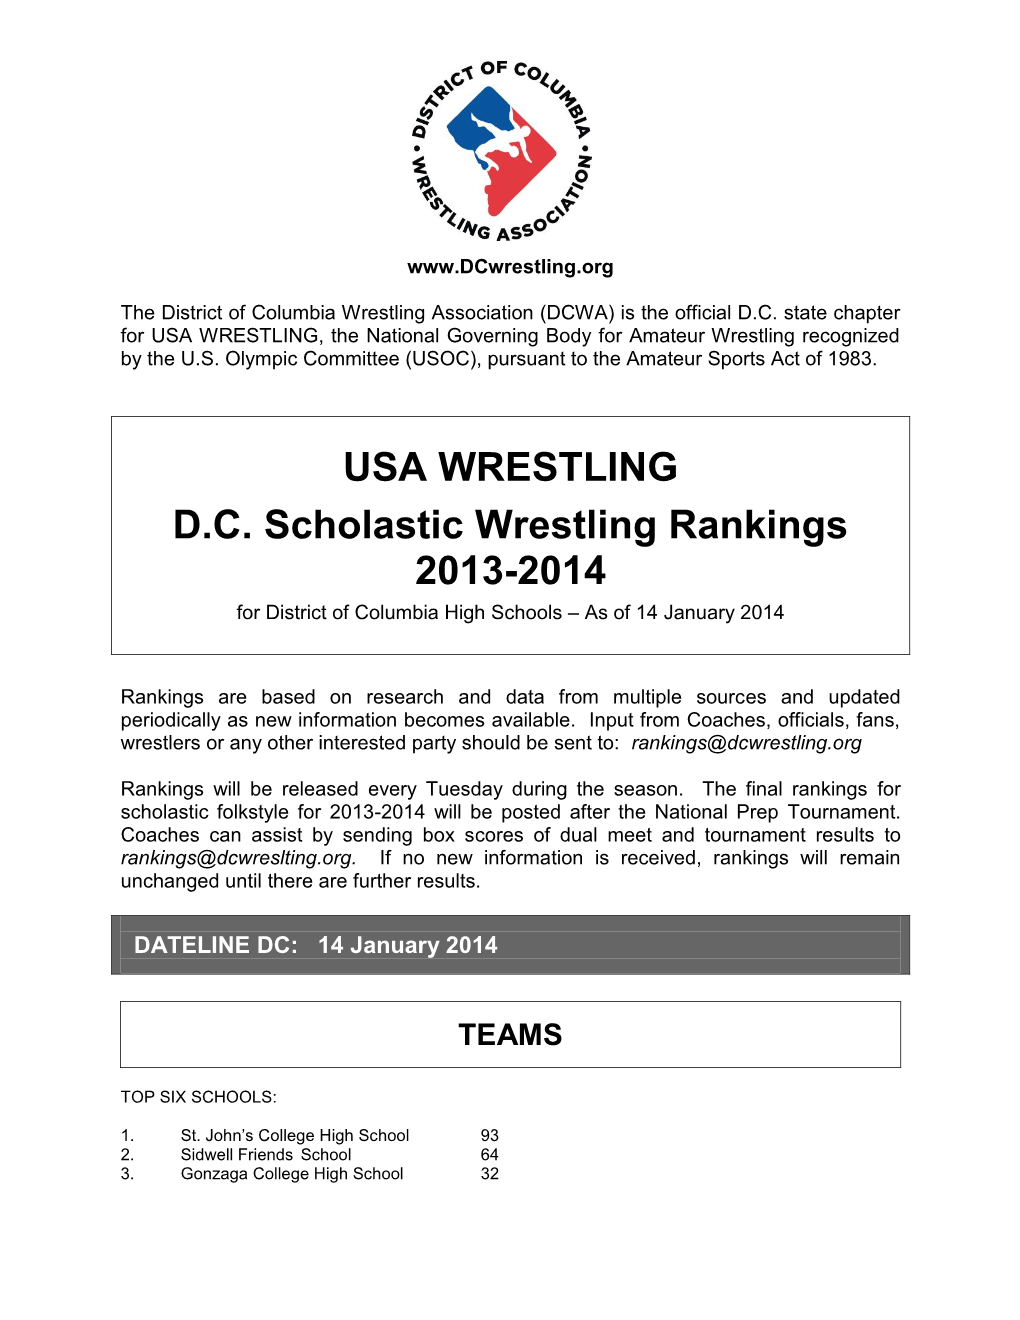 USA WRESTLING, the National Governing Body for Amateur Wrestling Recognized by the U.S